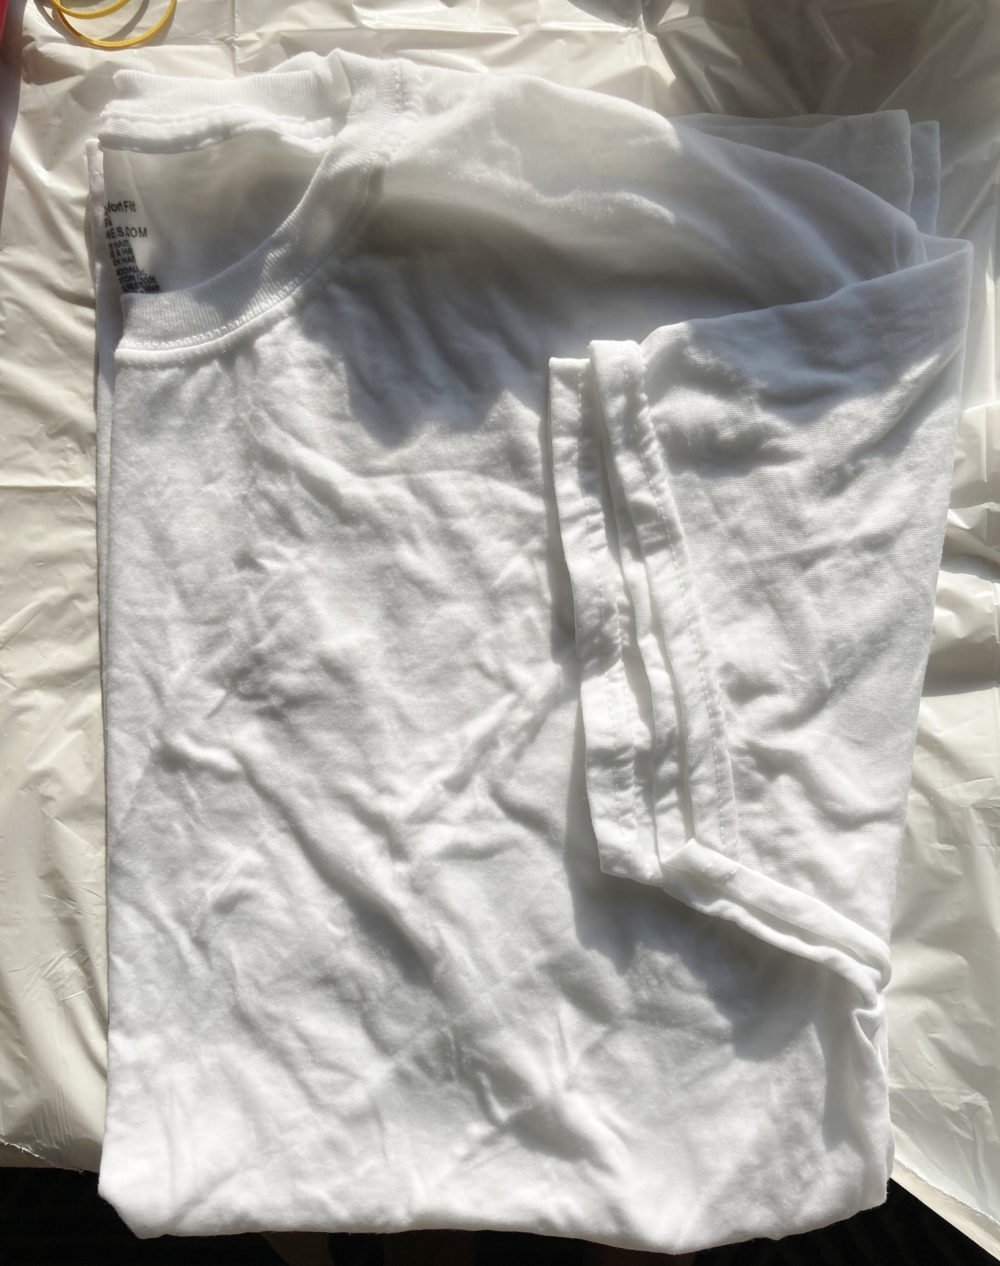 A folded white t-shirt for a piece on how to tie-dye at home